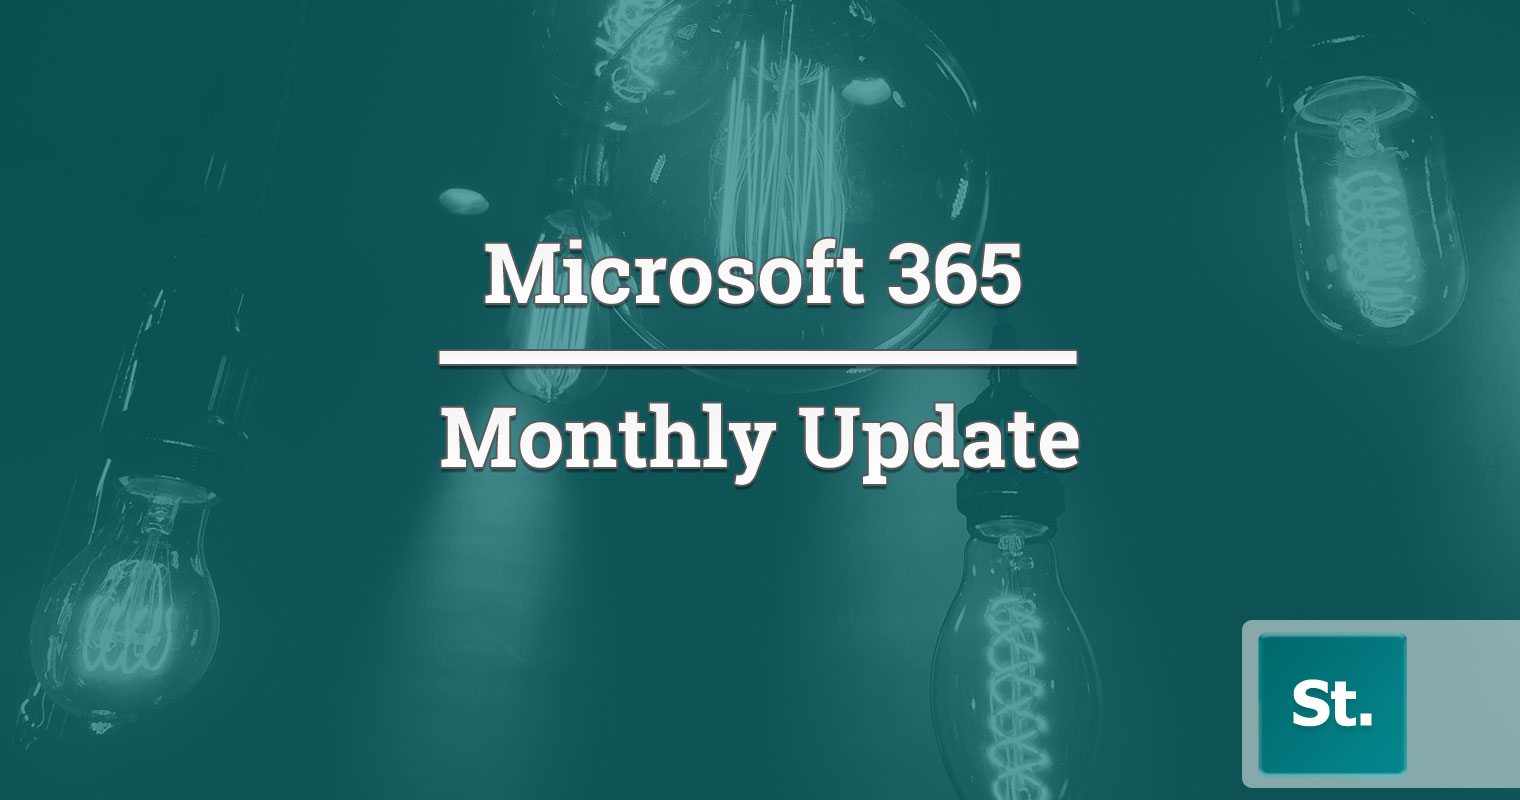 Microsoft 365 update for March 2020